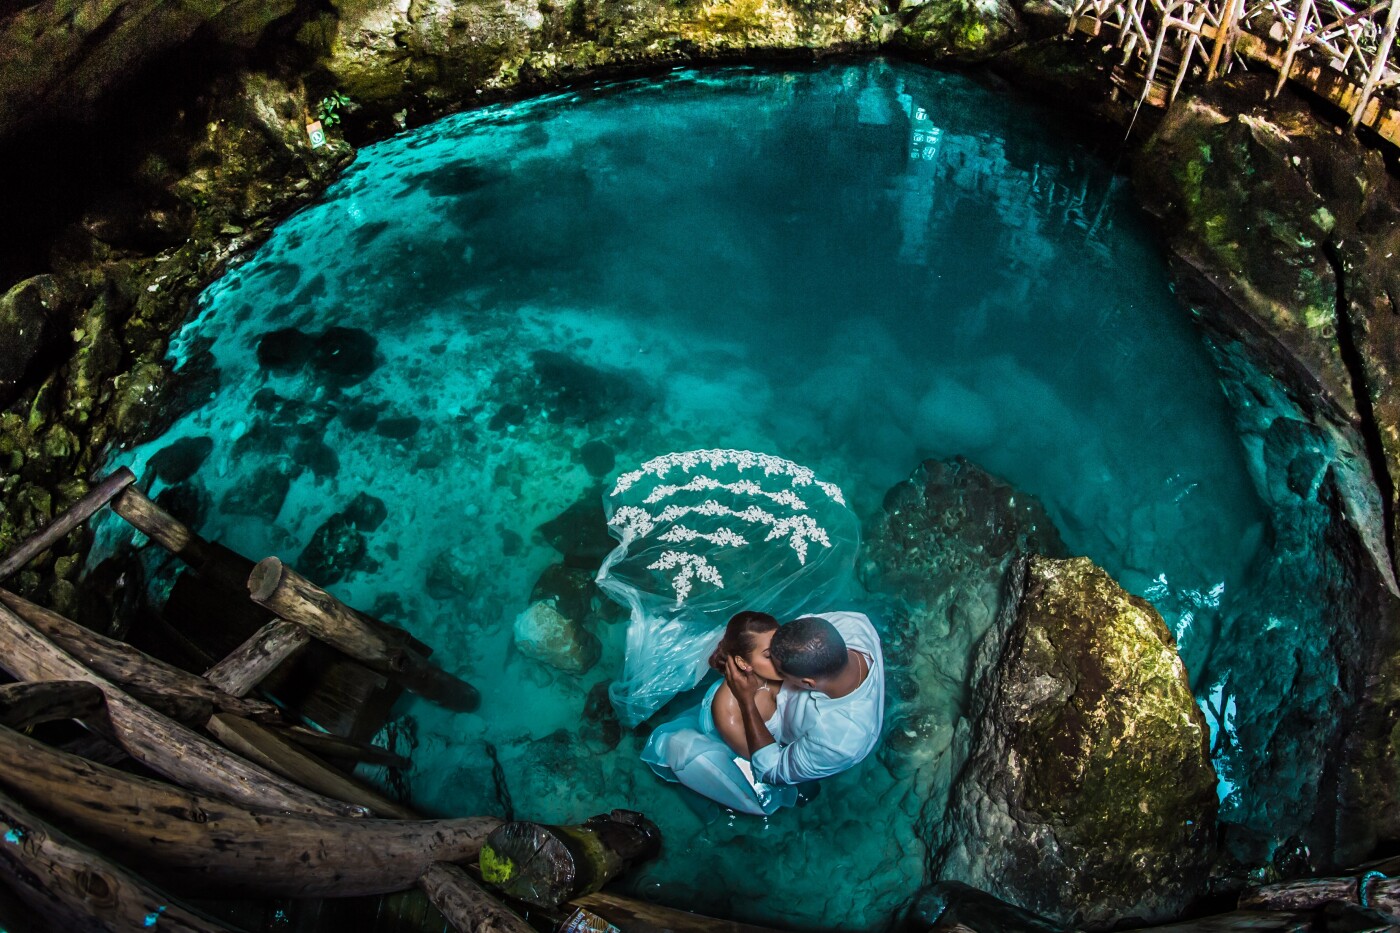 This image was taken in Hoyo Azul, Cap Cana, Higuey, East of the Dominican Republic. Catherine and Joaquin were married in November of 2015 but they wanted us to do “the trash the dress” and an adventurous photo shoot. We met the same day of the photo shoot. However, Catherine and I had spoken a lot over social media. The day of the photo shoot it was very cloudy and it rained. Cap Cana is a spectacular place and even though it was raining, we caught some amazing images. Joaquin was not very convinced about jumping in the water but as soon as he saw me jumping in with no problem, they both entered the water and had fun taking the images for this beautiful “trash the dress”.